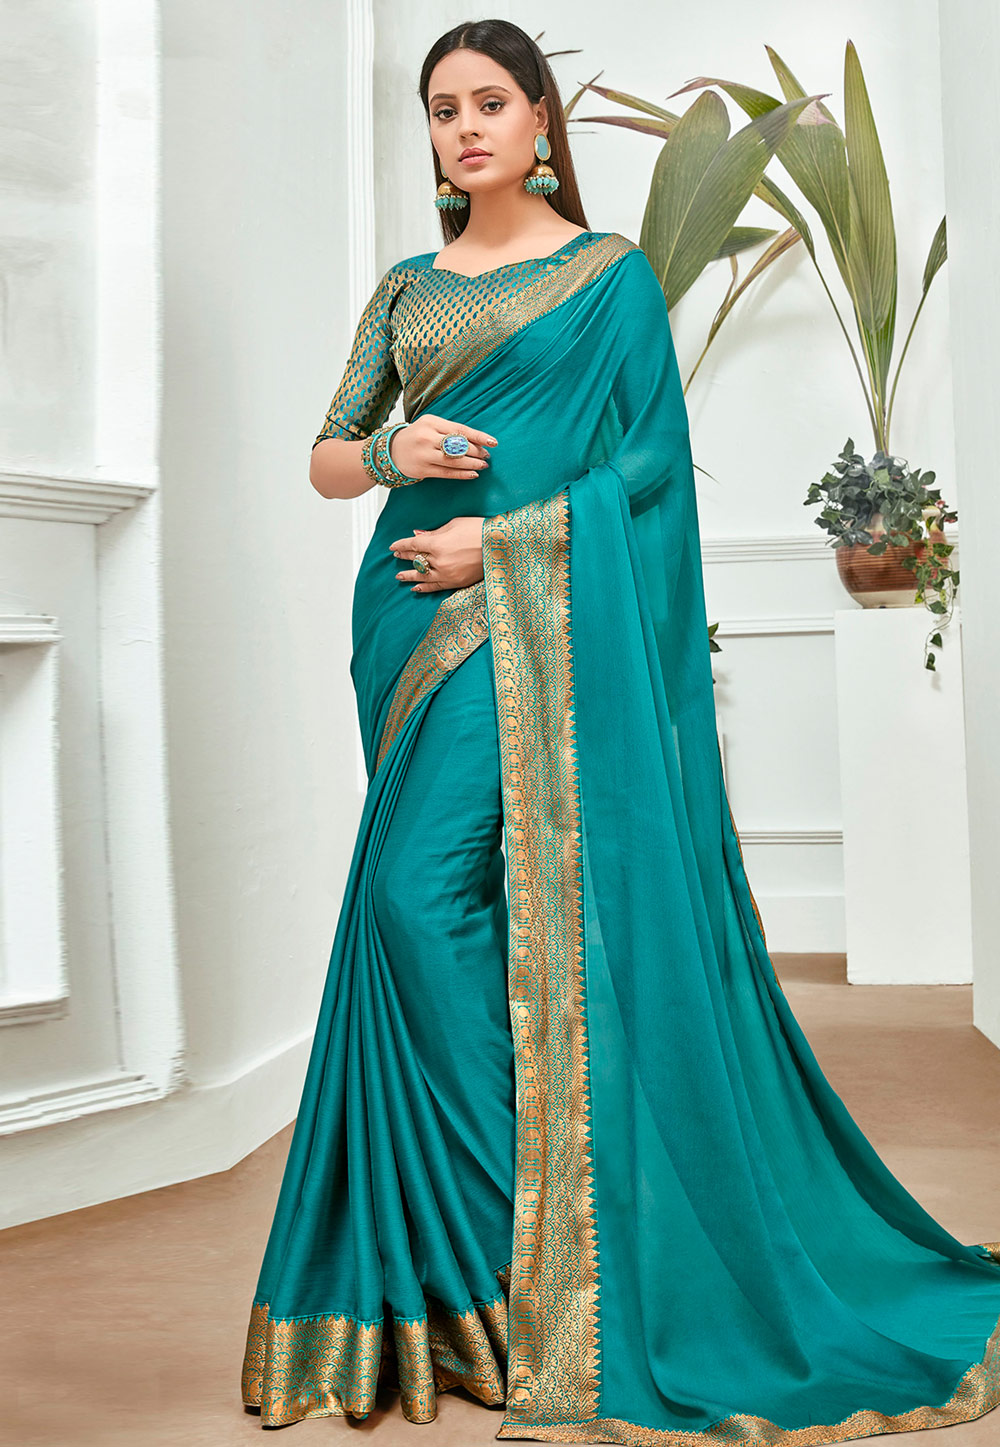 Turquoise Blue Chiffon Saree With Blouse 201207